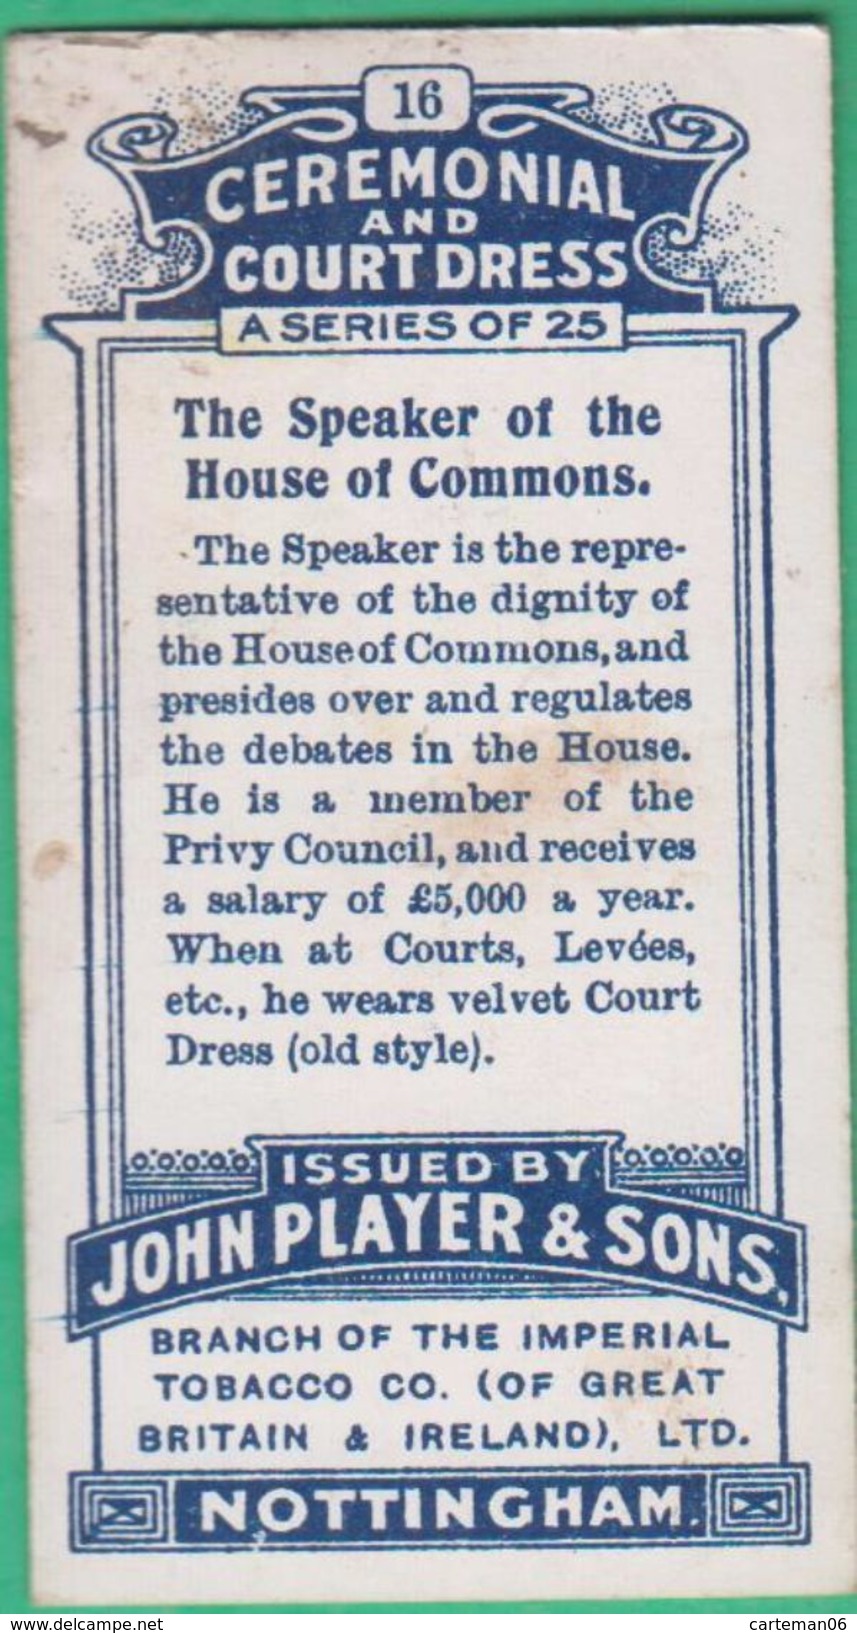 Chromo John Player & Sons, Player's Cigarettes, Ceremonial And Court Dress - The Speaker Of The House Of Commons N°16 - Player's